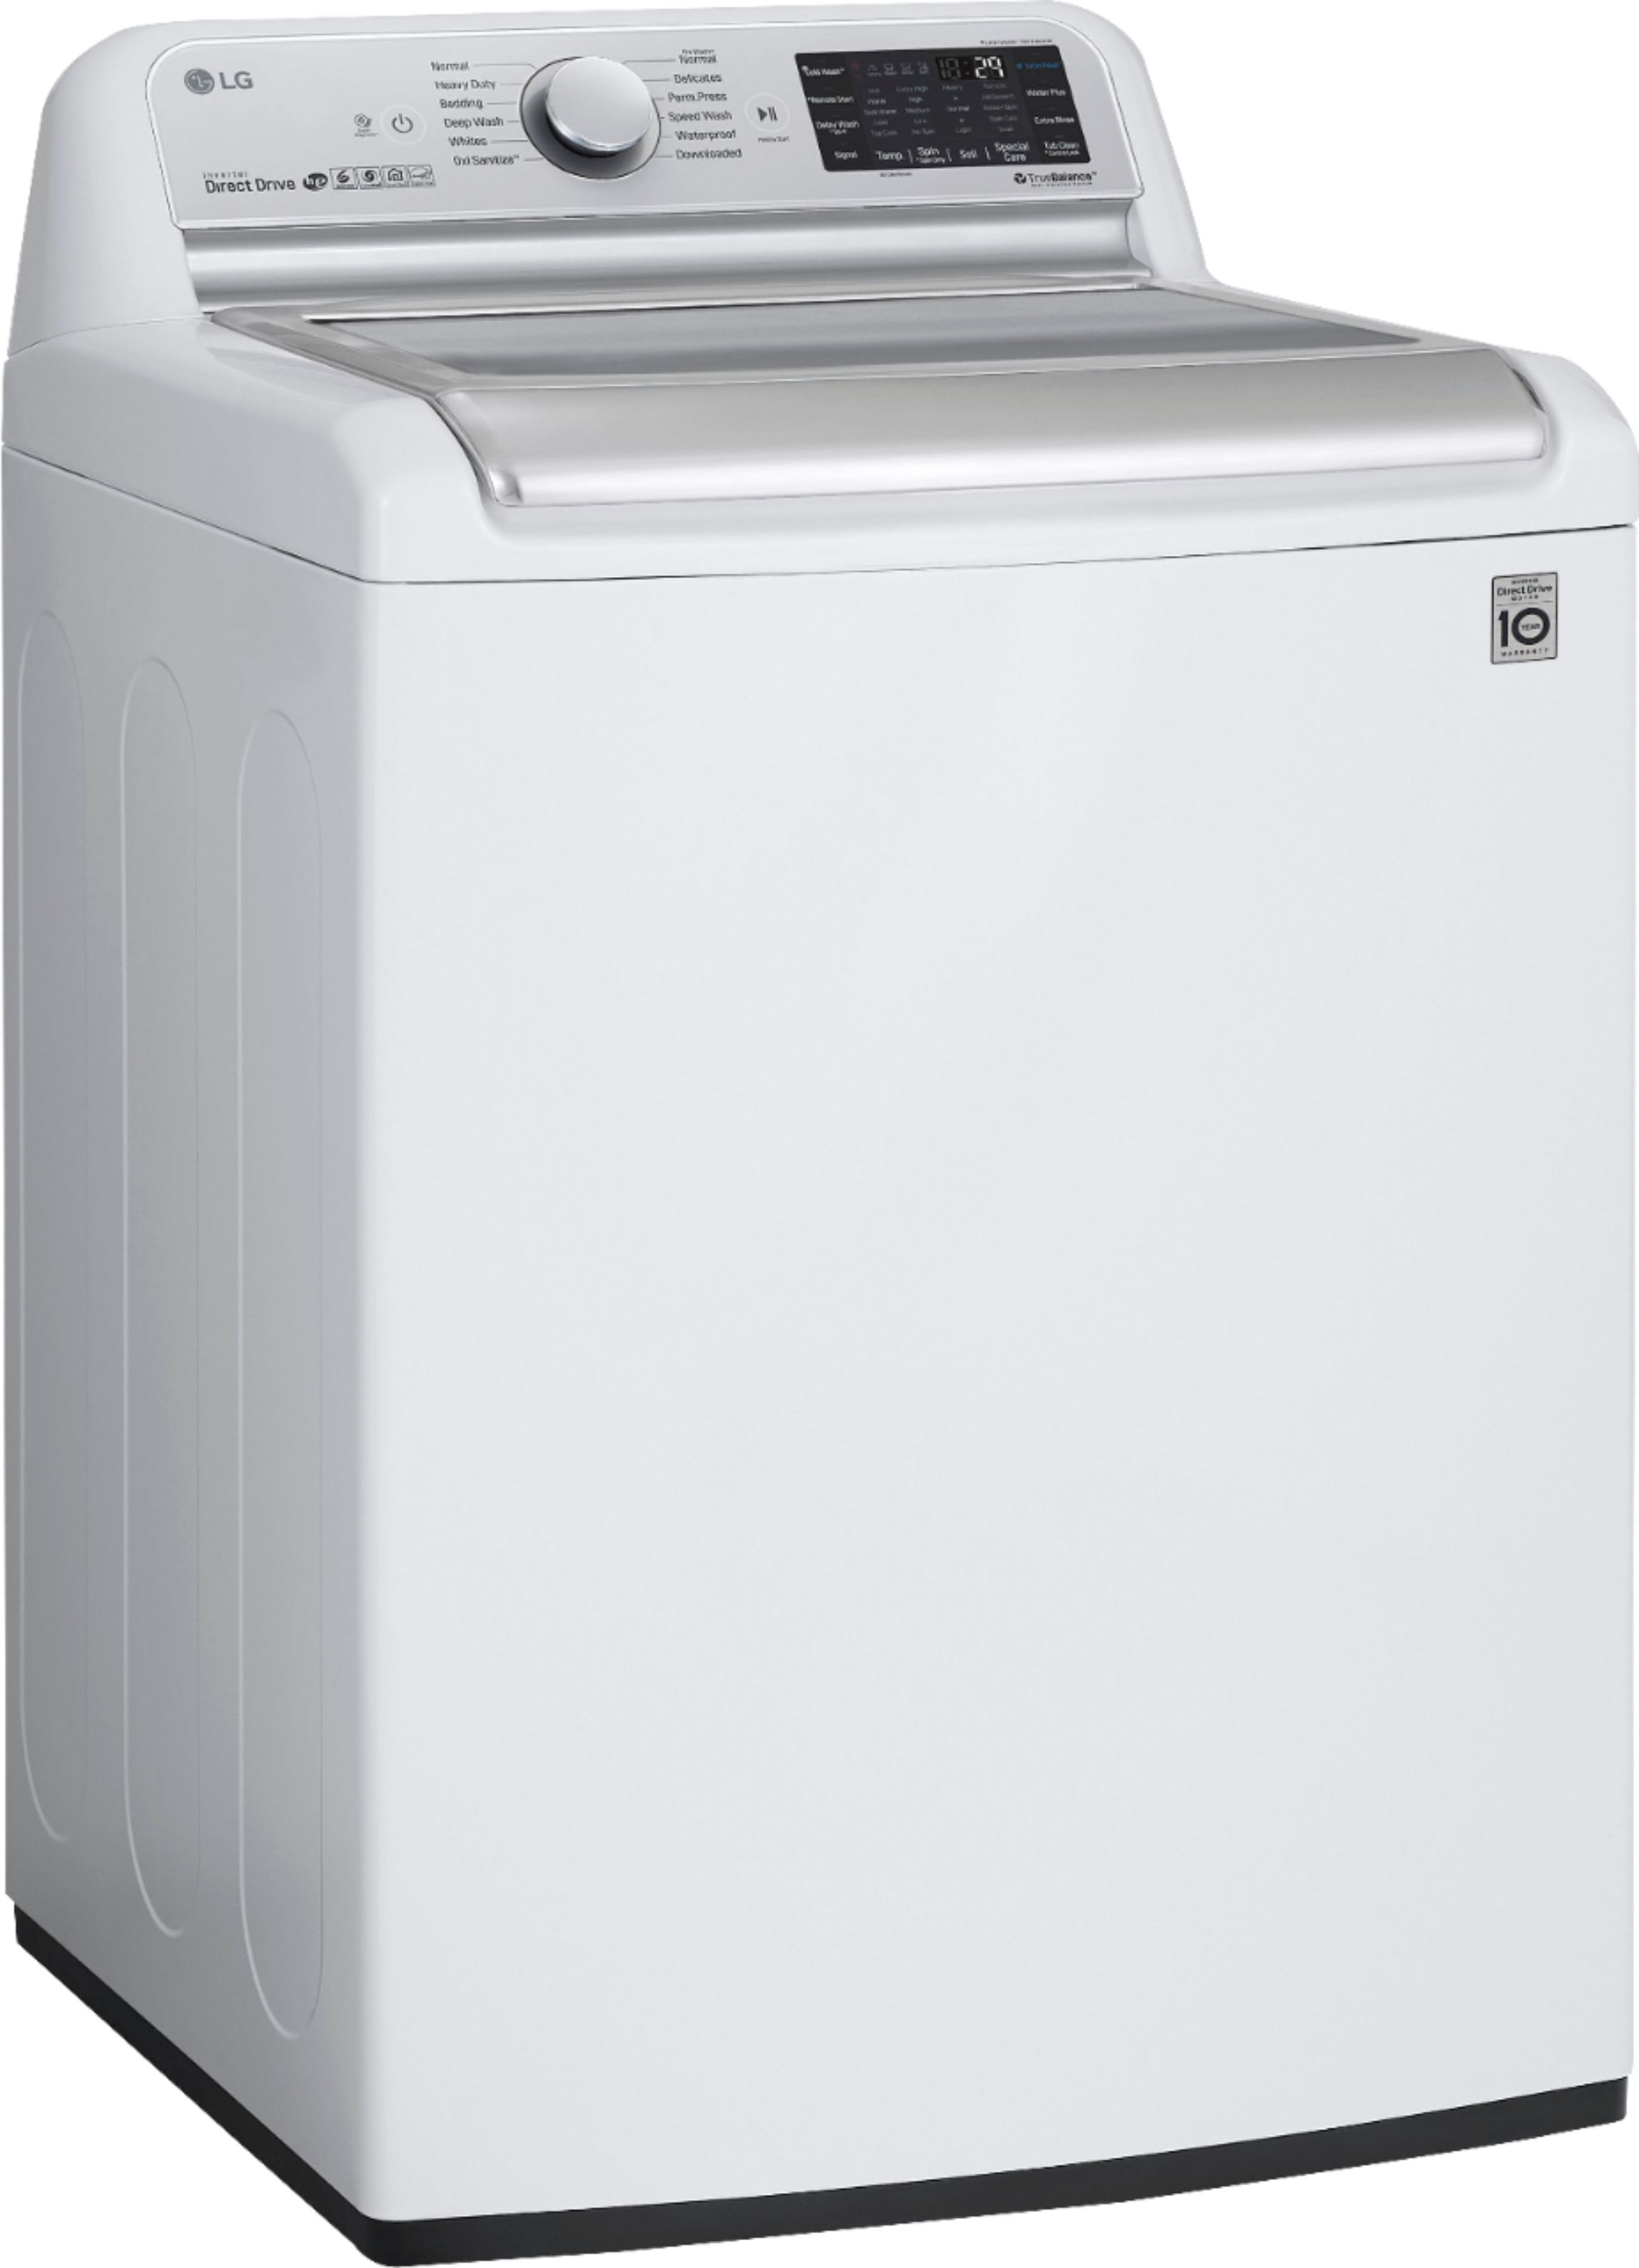 LG 5.5 Cu. Ft. HighEfficiency Smart Top Load Washer with TurboWash3D